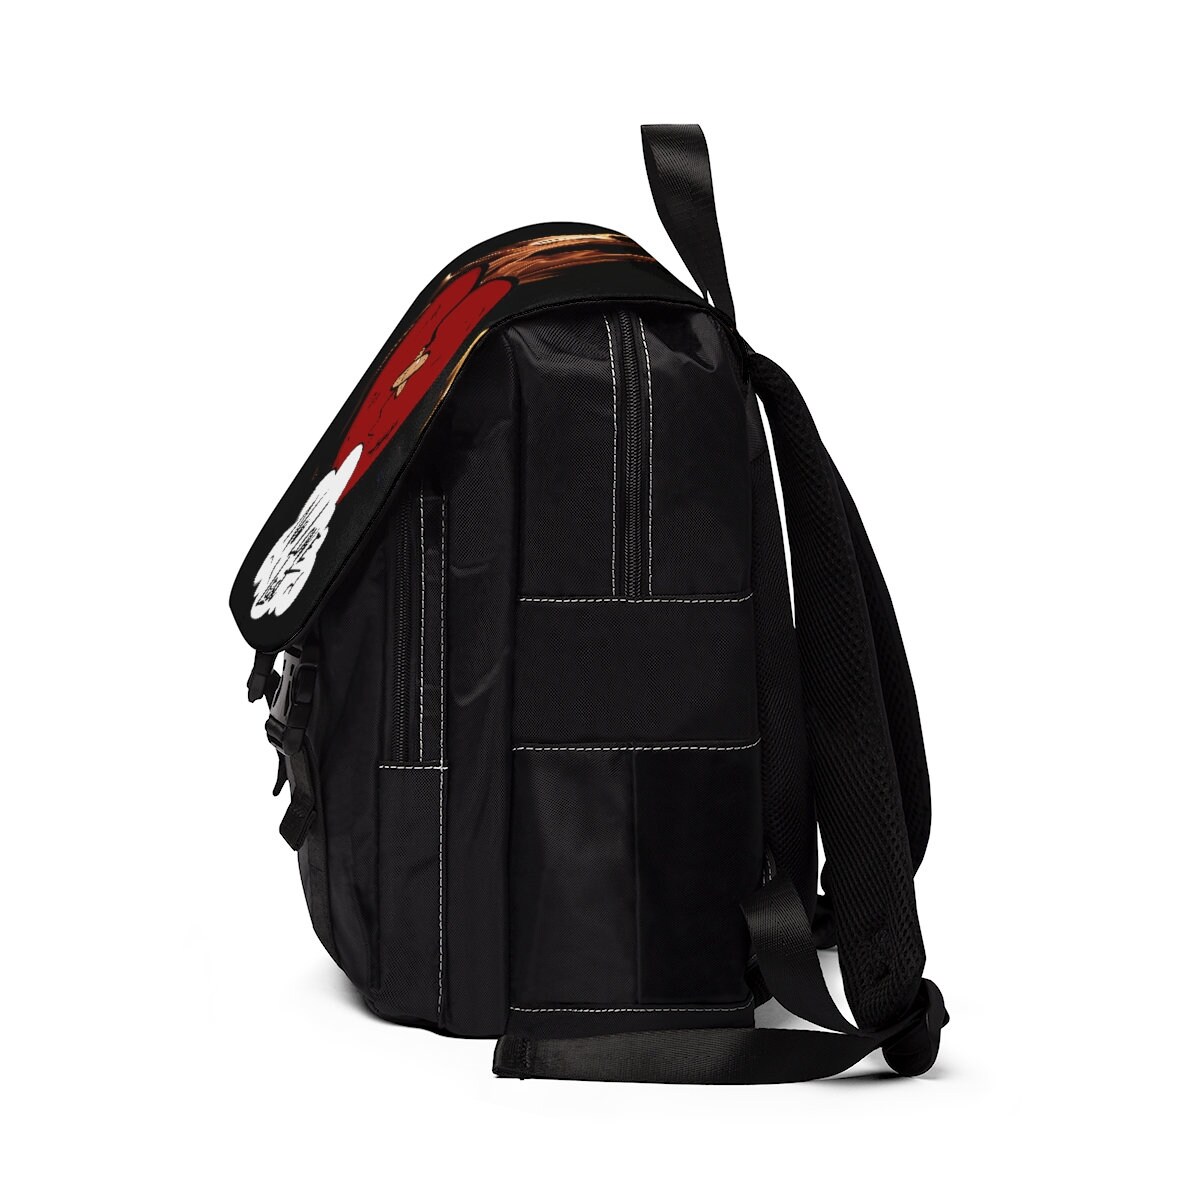 Discover No Love Lost Unisex Casual Shoulder Backpack